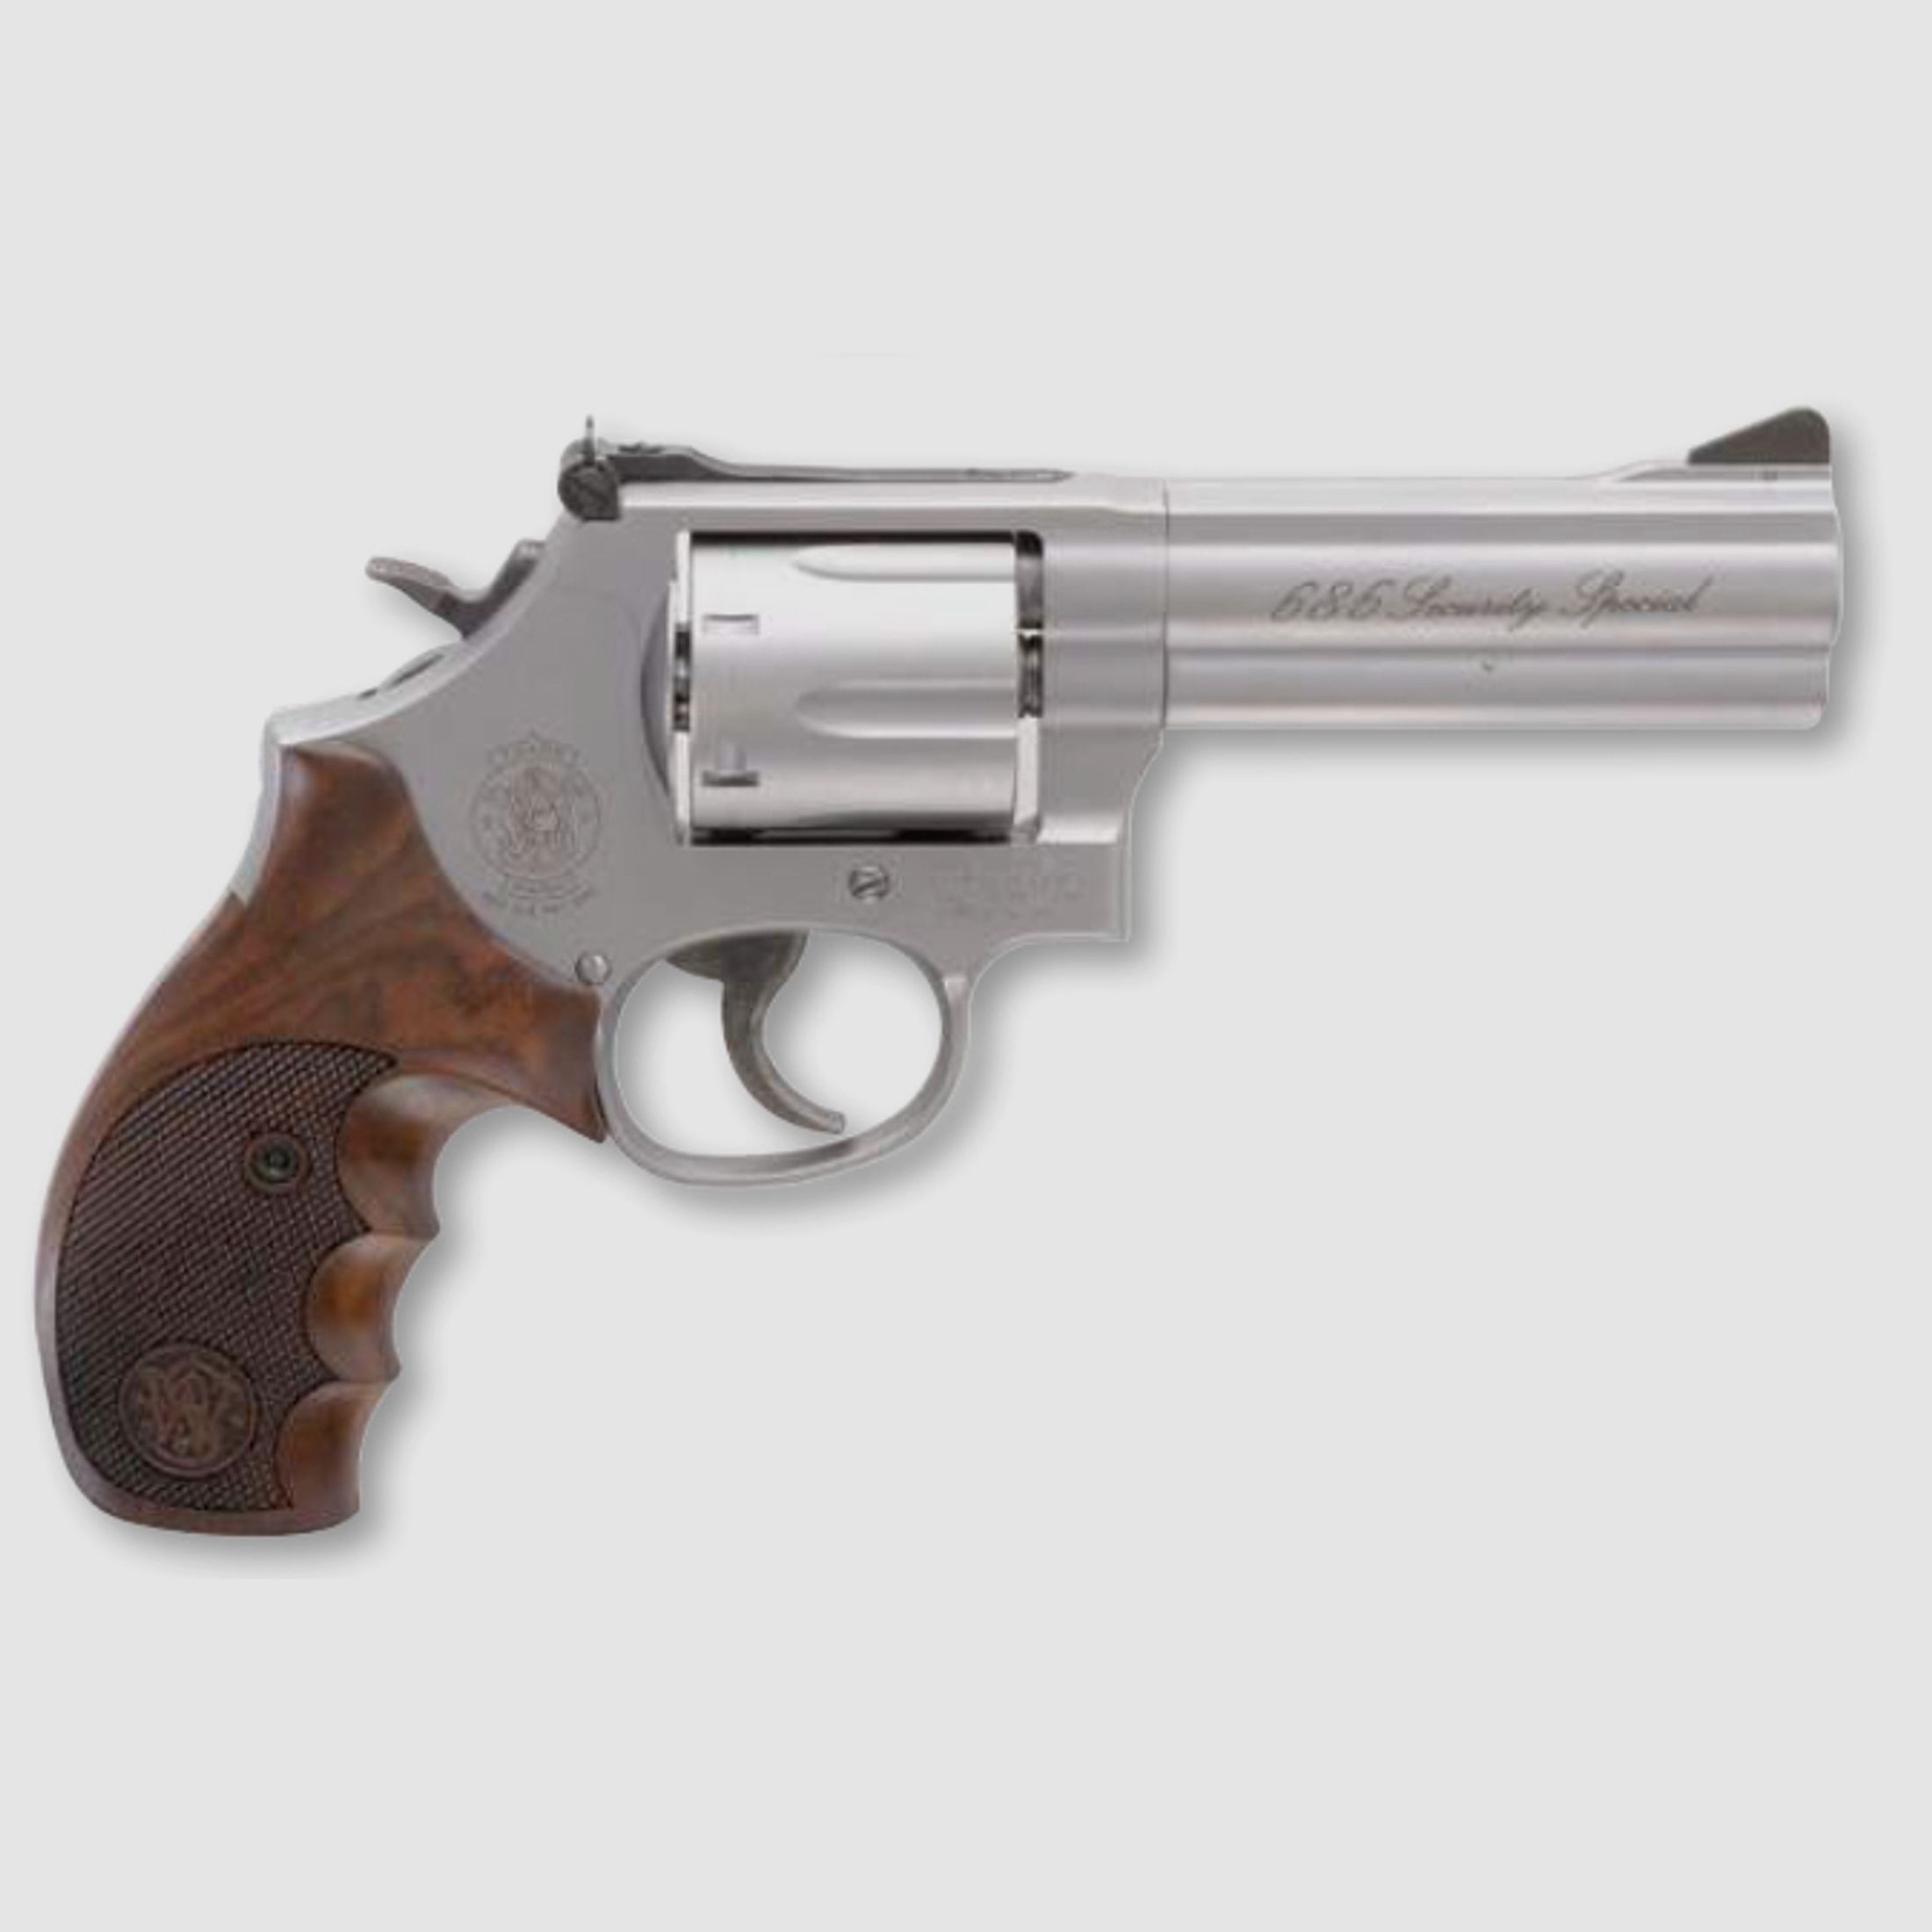 Smith & Wesson Revolver 686 Security Special 4 Zoll